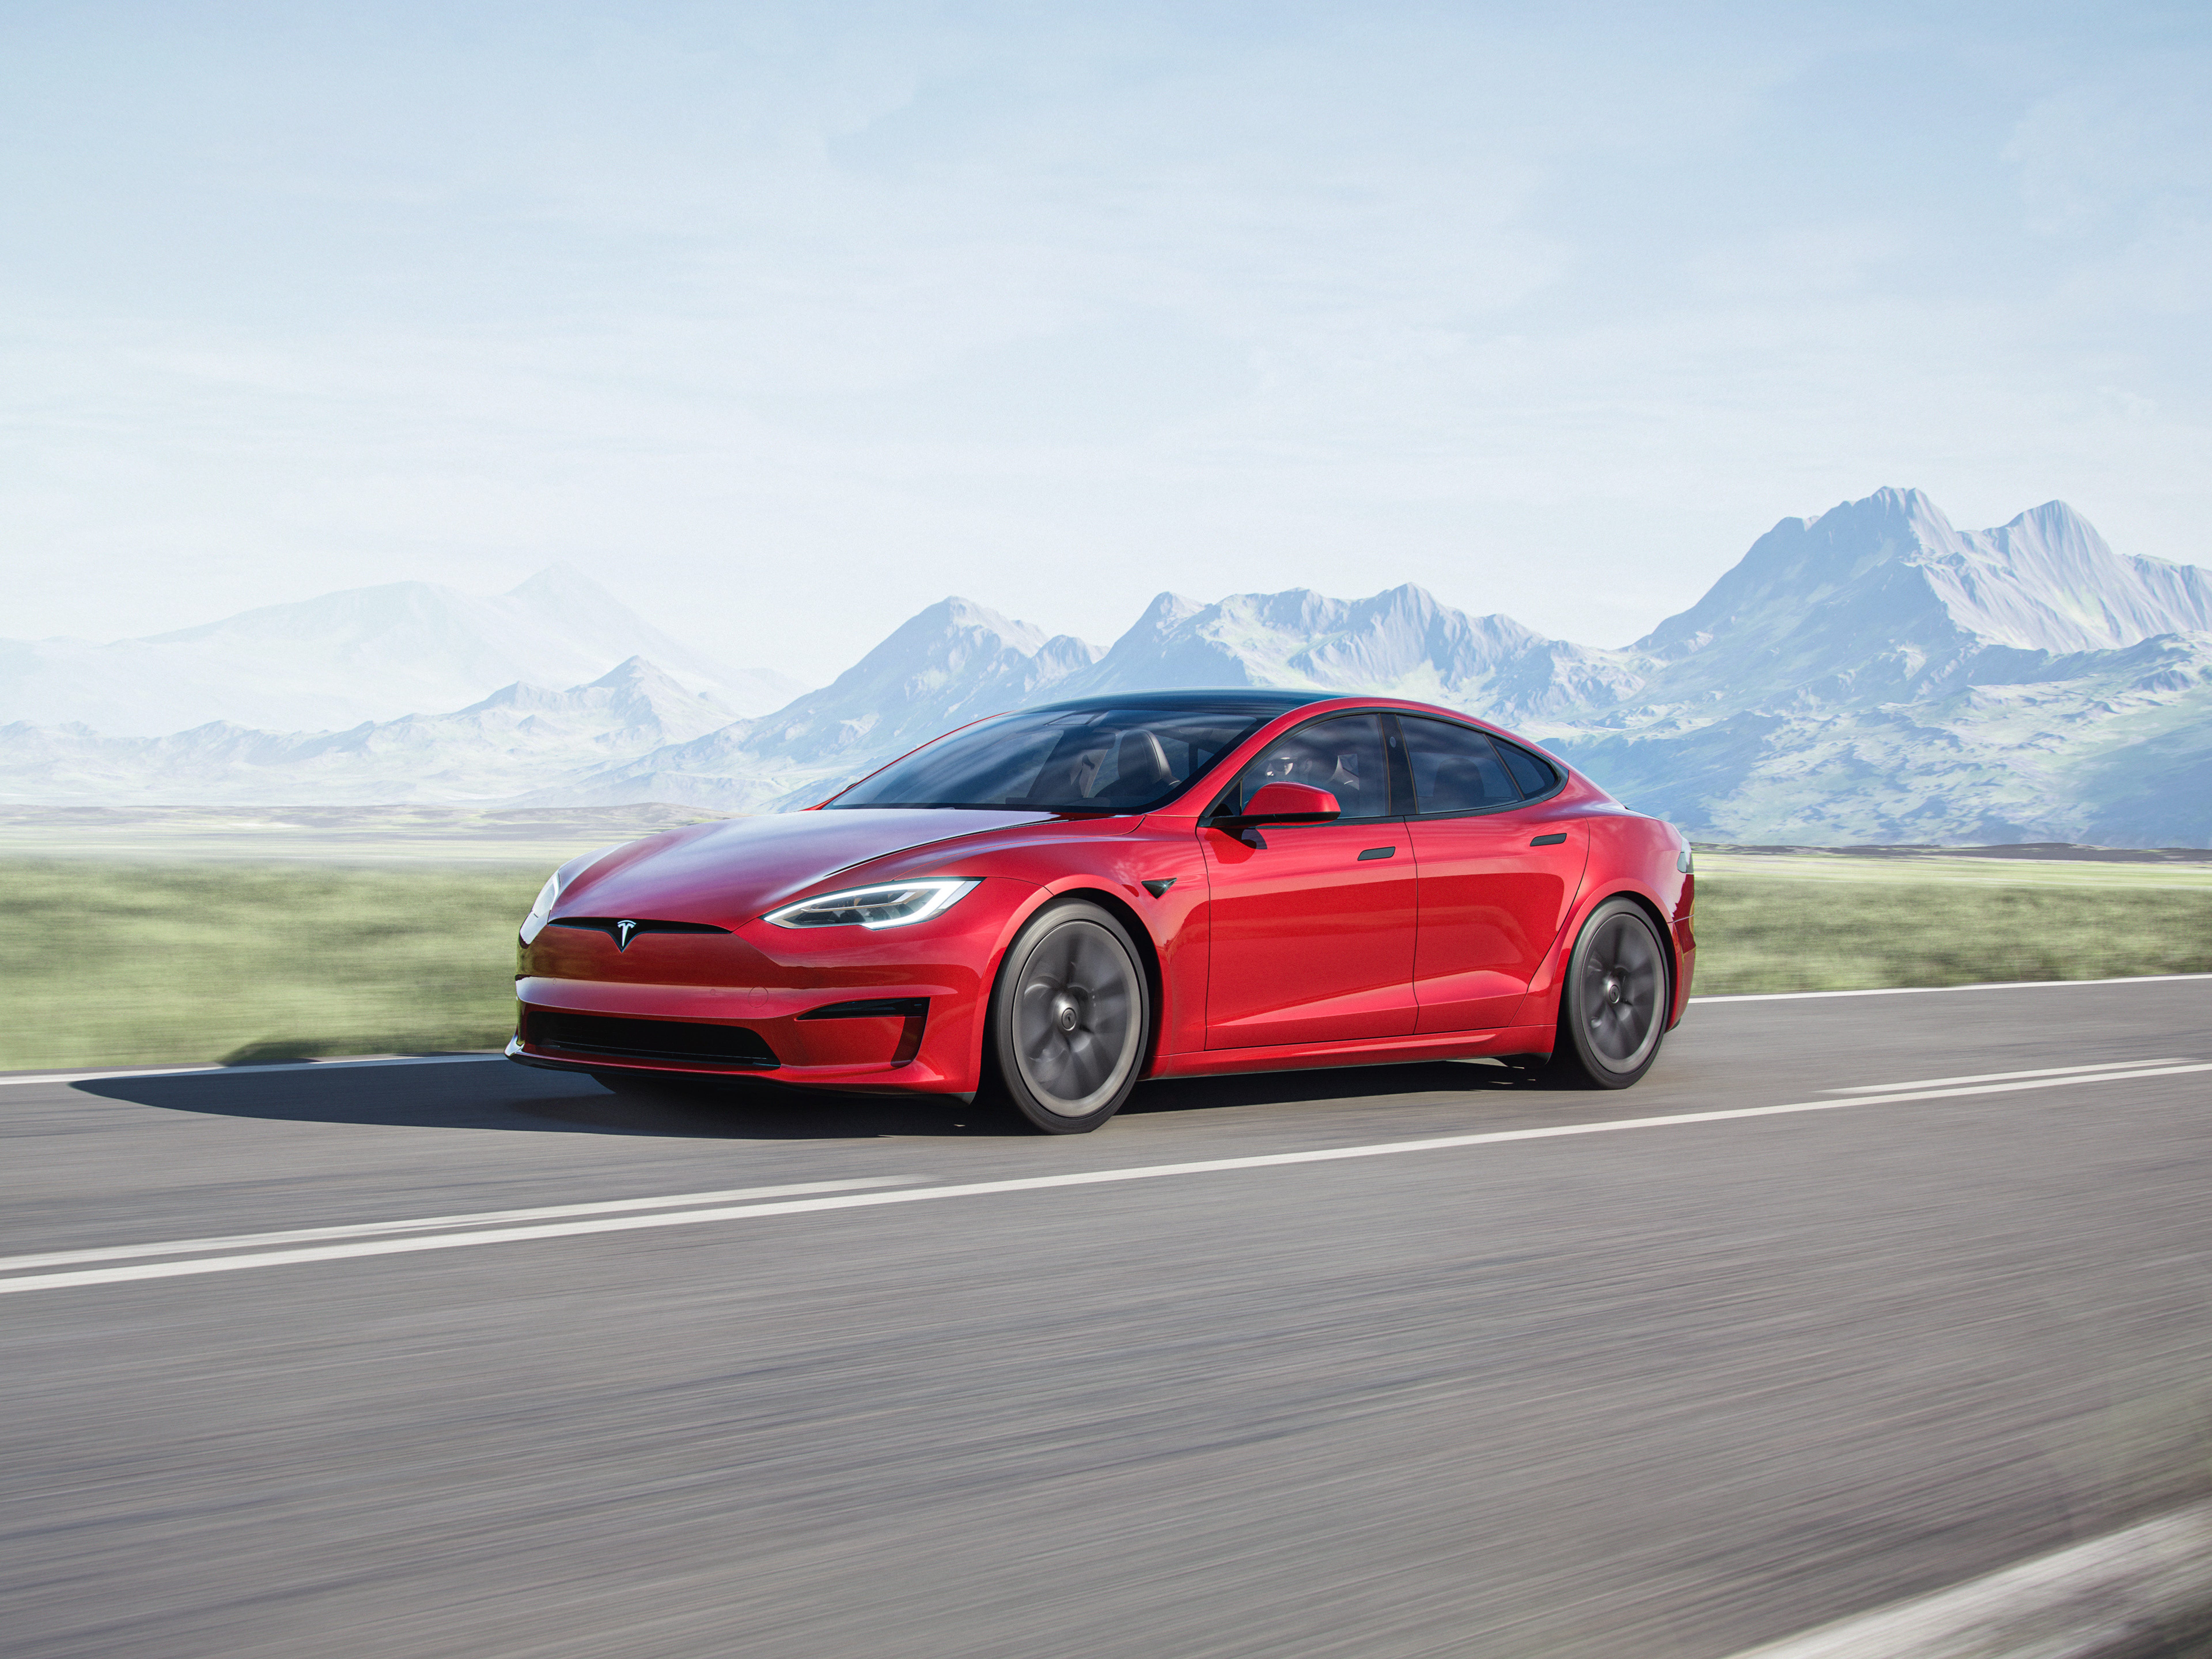 Video: Hacked Tesla Model S Plaid Goes Over 200 mph